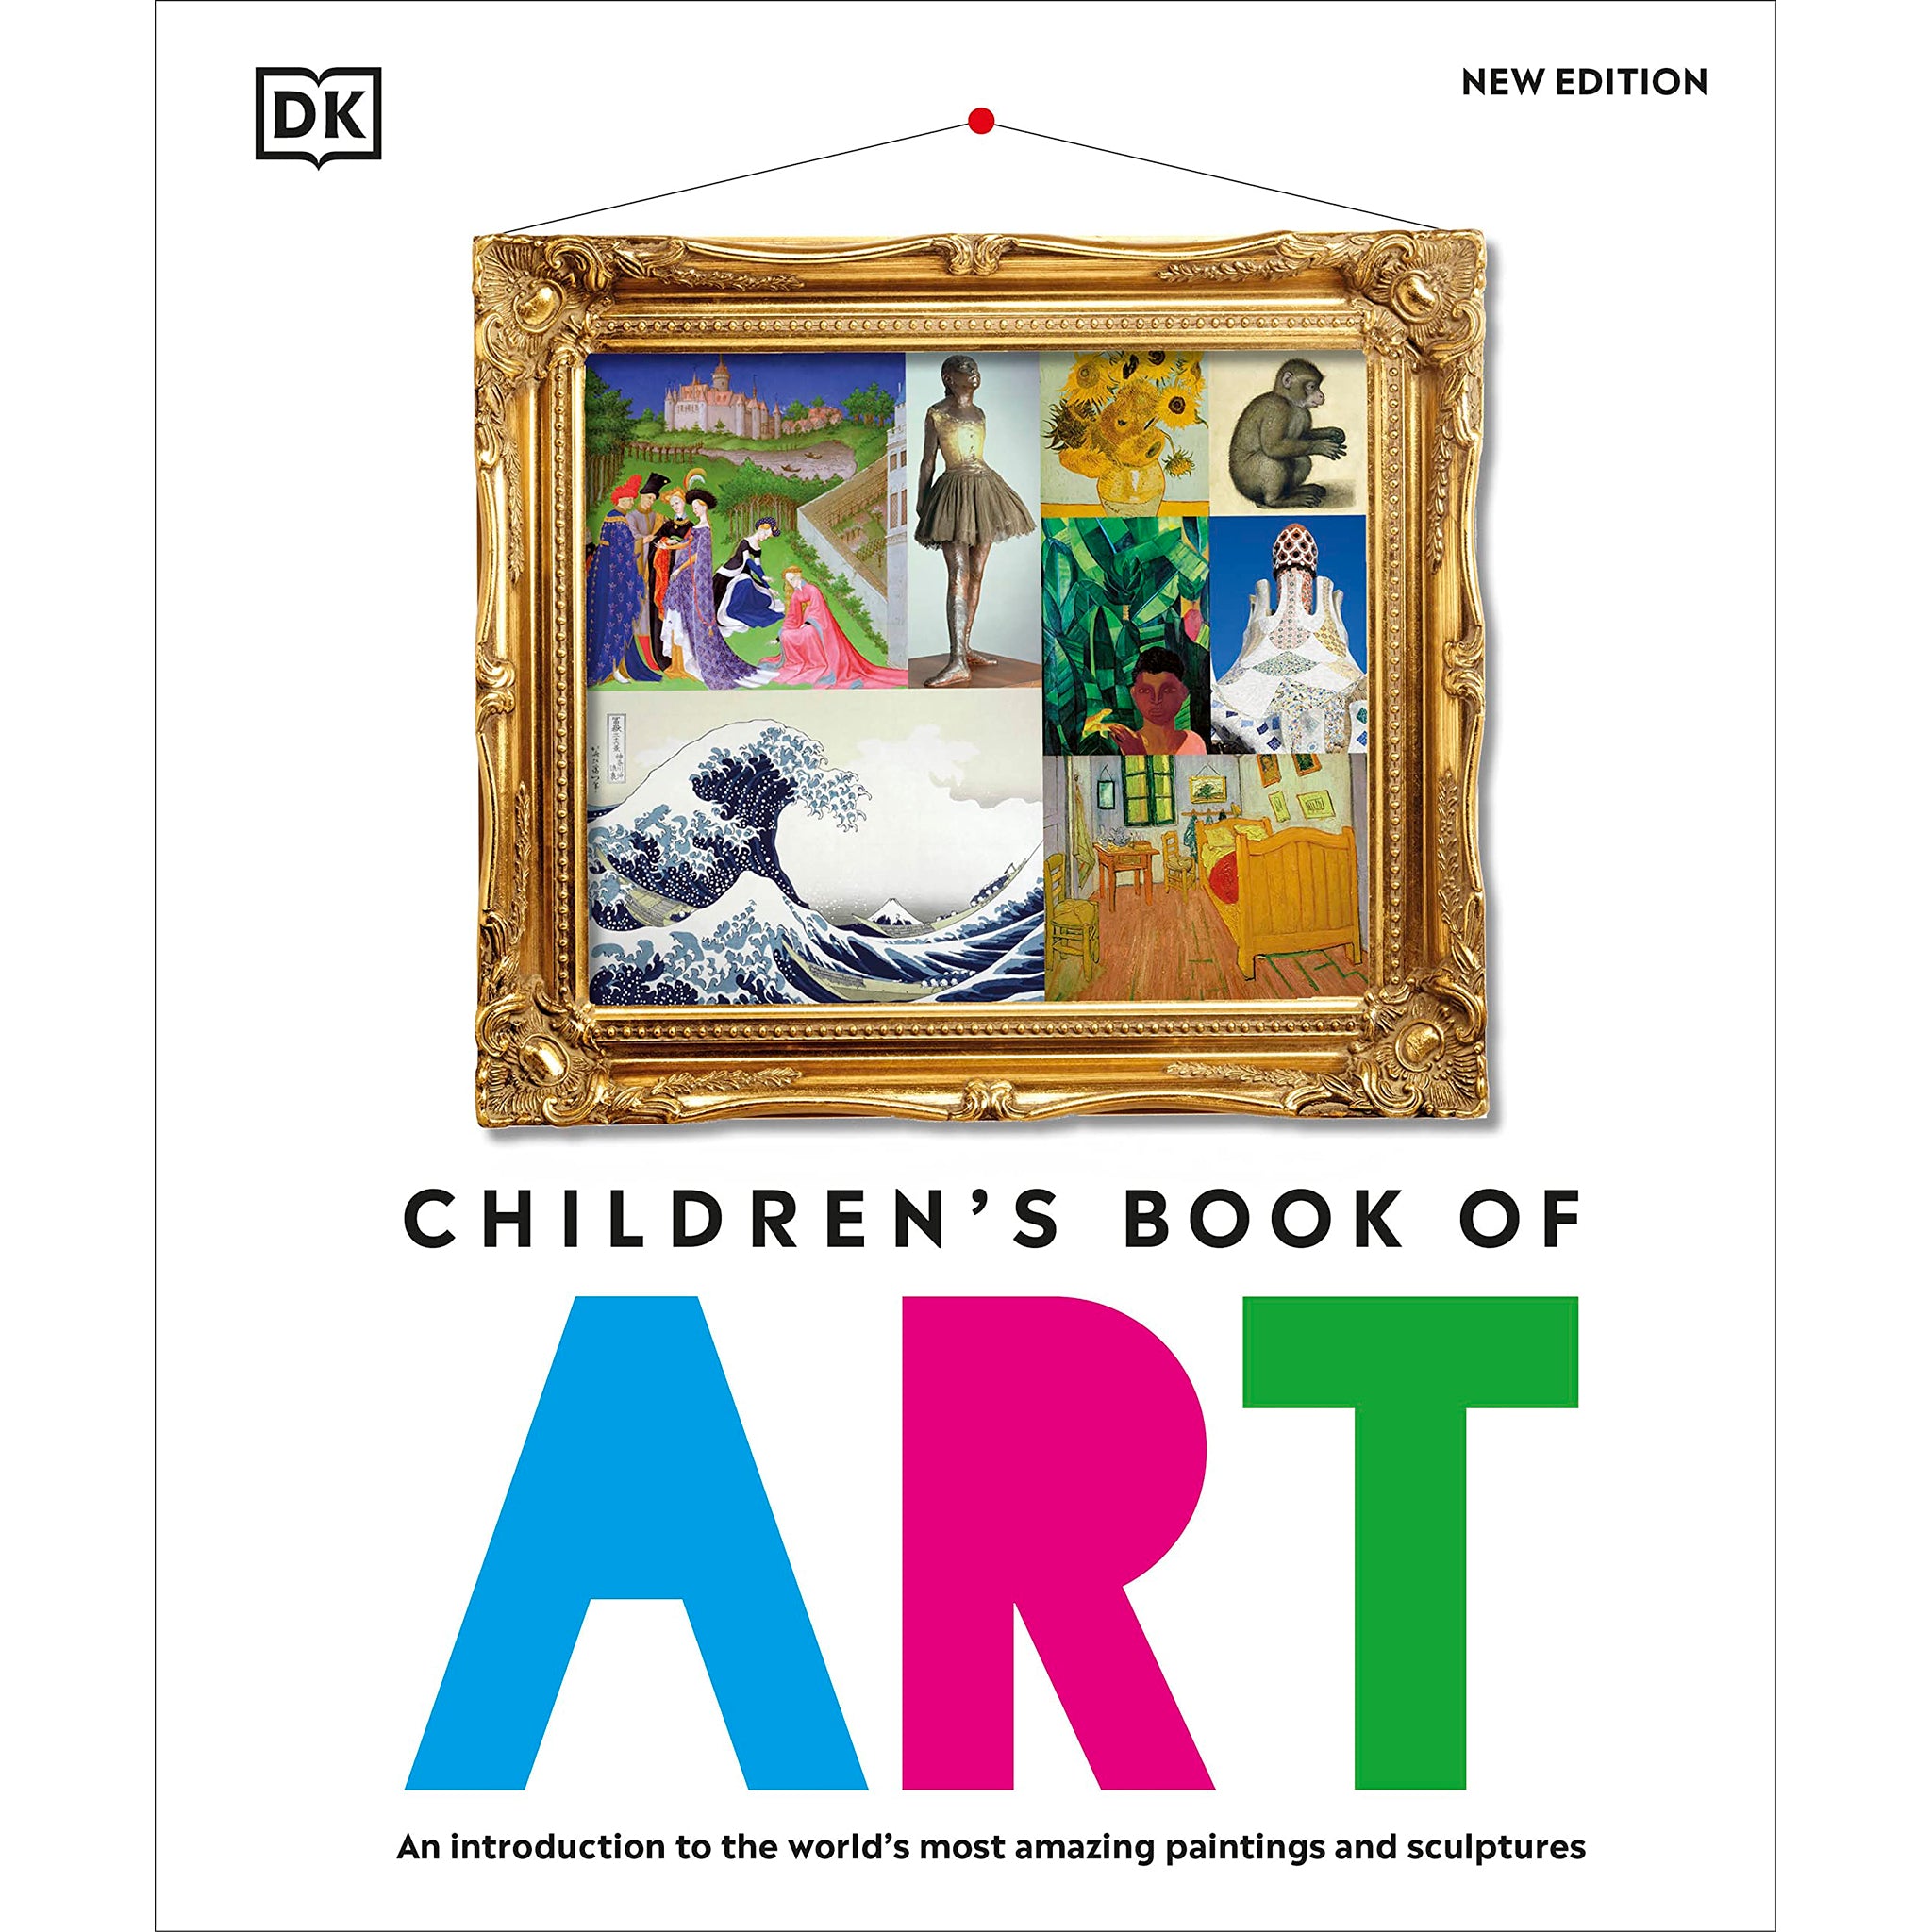 Art History for Preschoolers - 40+ Books to Study Great Artists